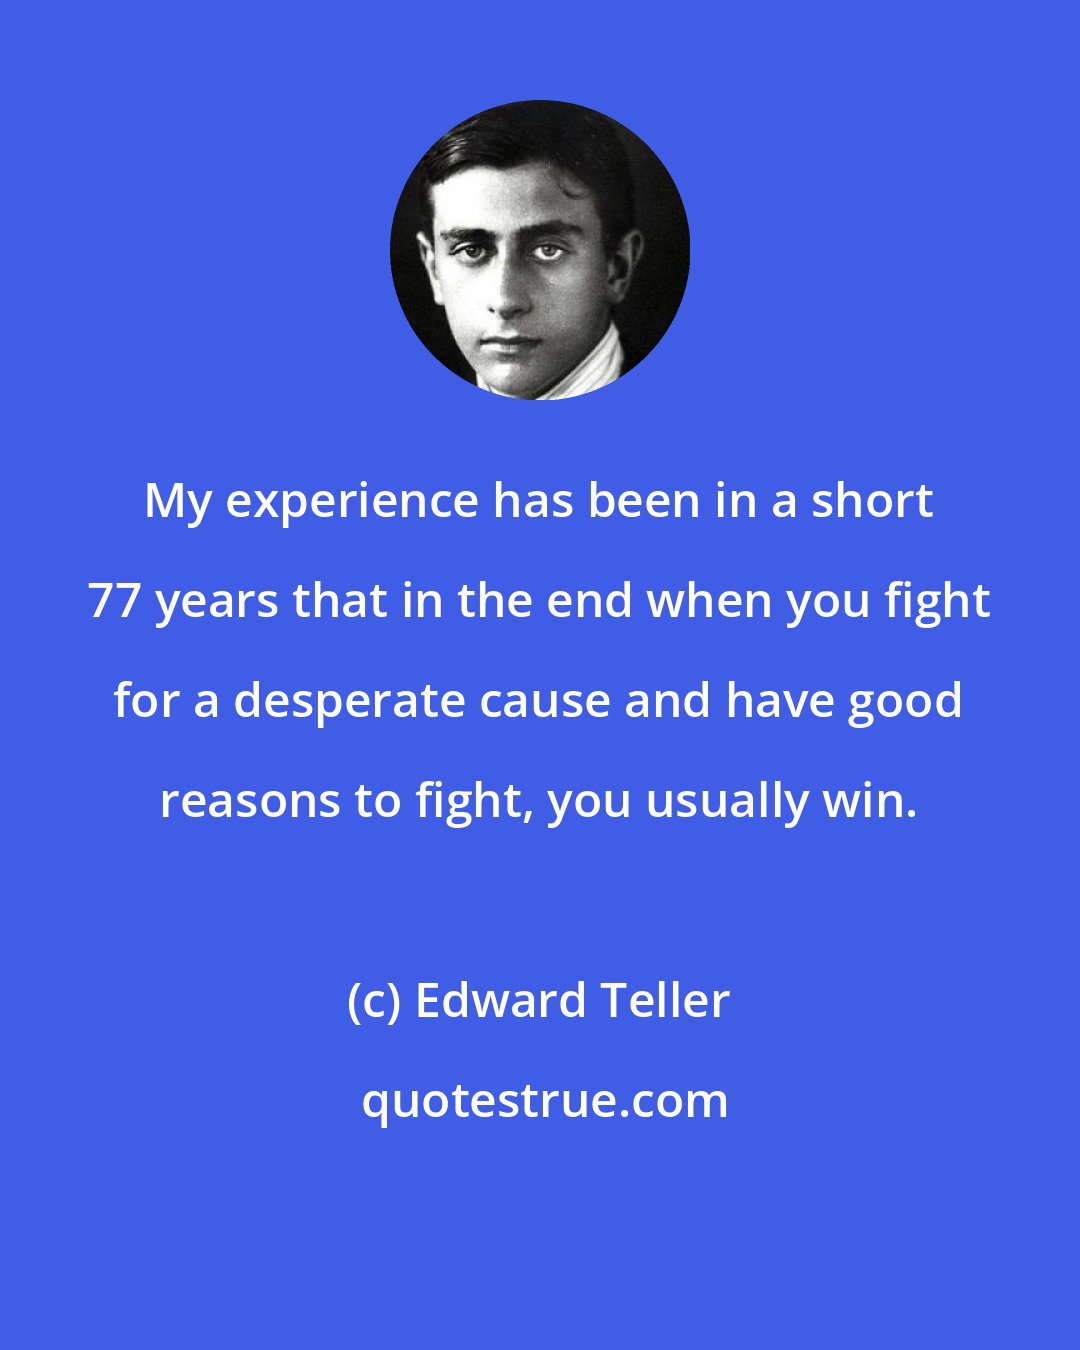 Edward Teller: My experience has been in a short 77 years that in the end when you fight for a desperate cause and have good reasons to fight, you usually win.